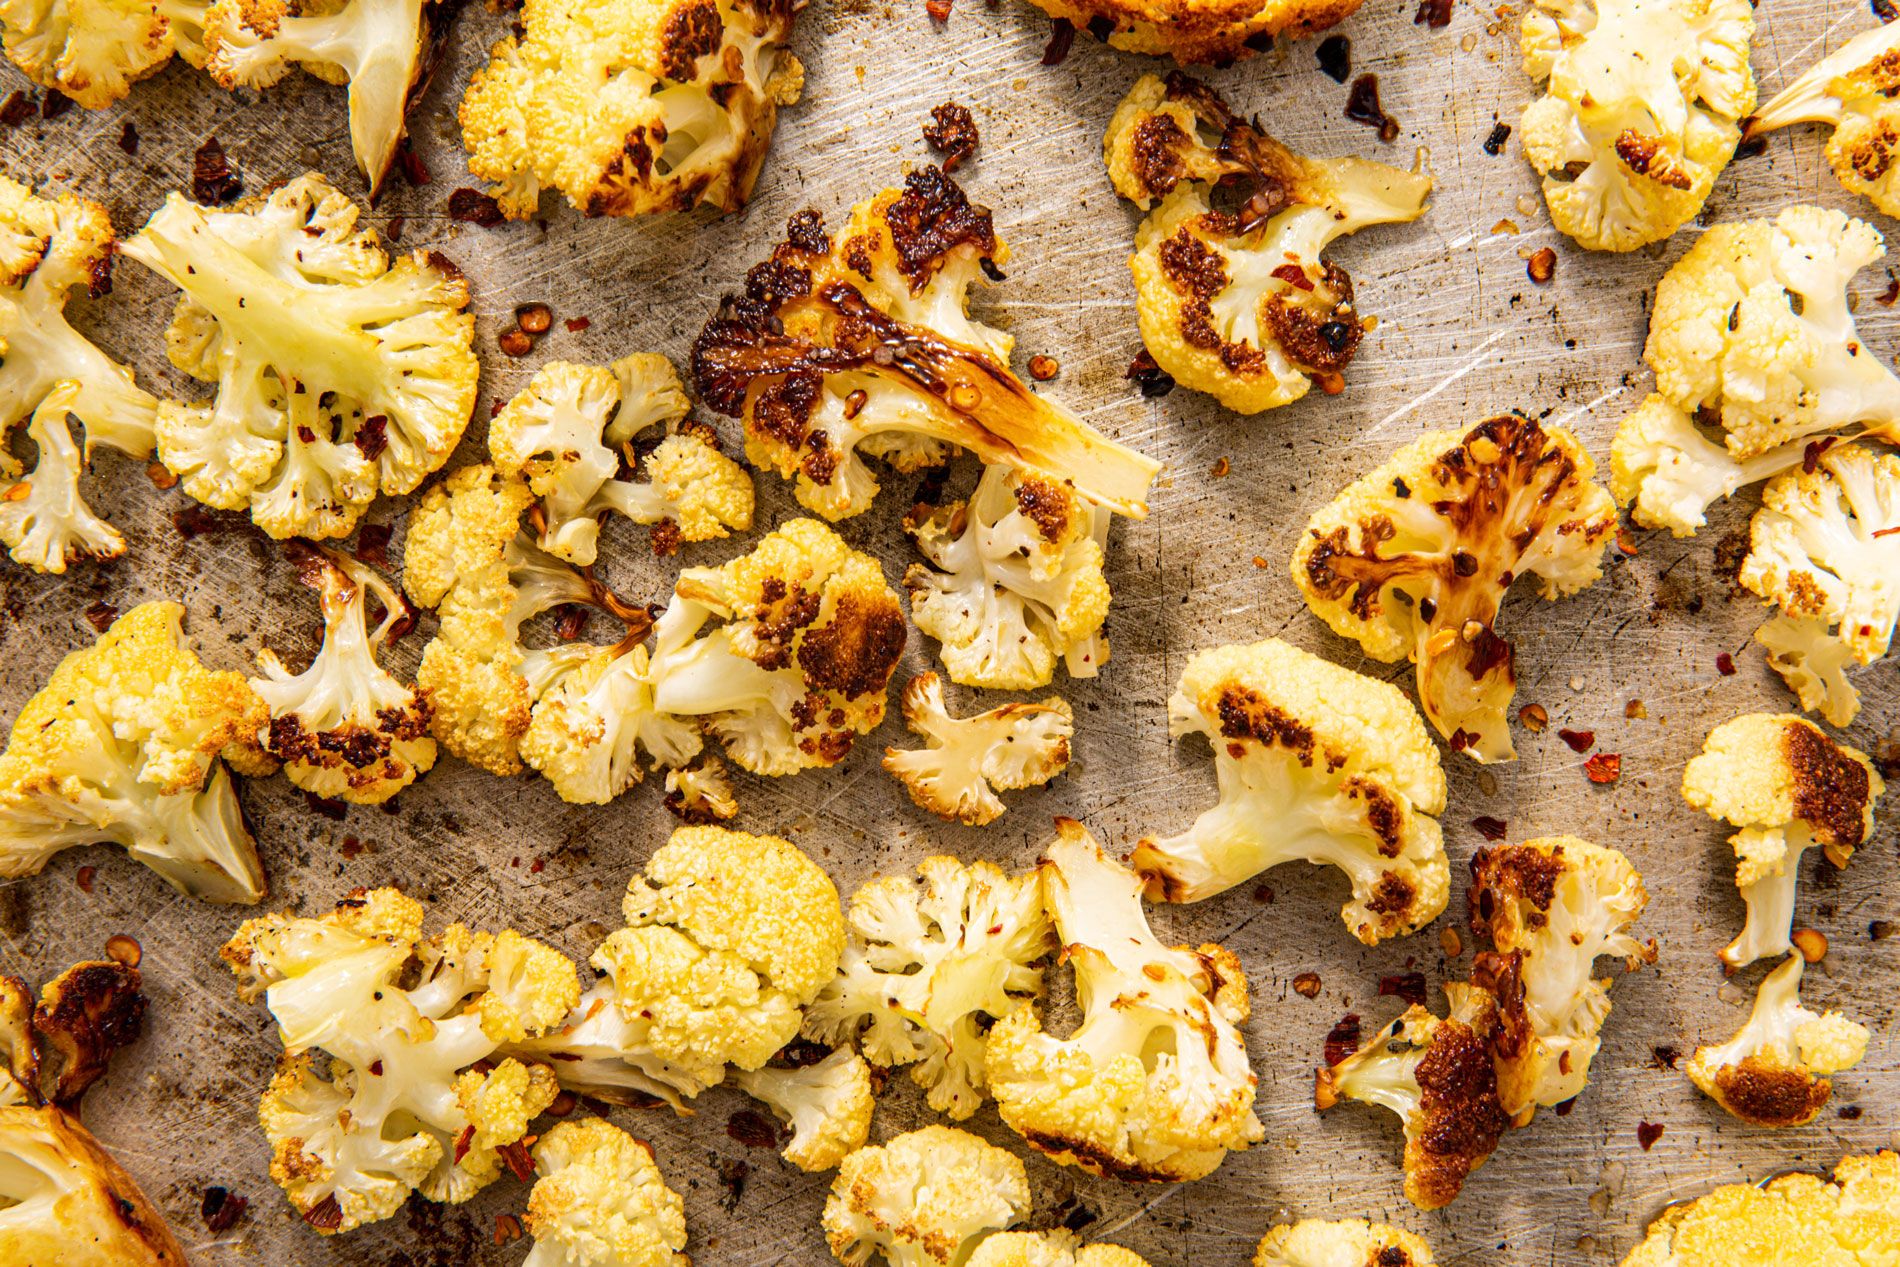 Best Roasted Cauliflower Recipe How To Cook Cauliflower,What Do Cats Like To Eat For Breakfast